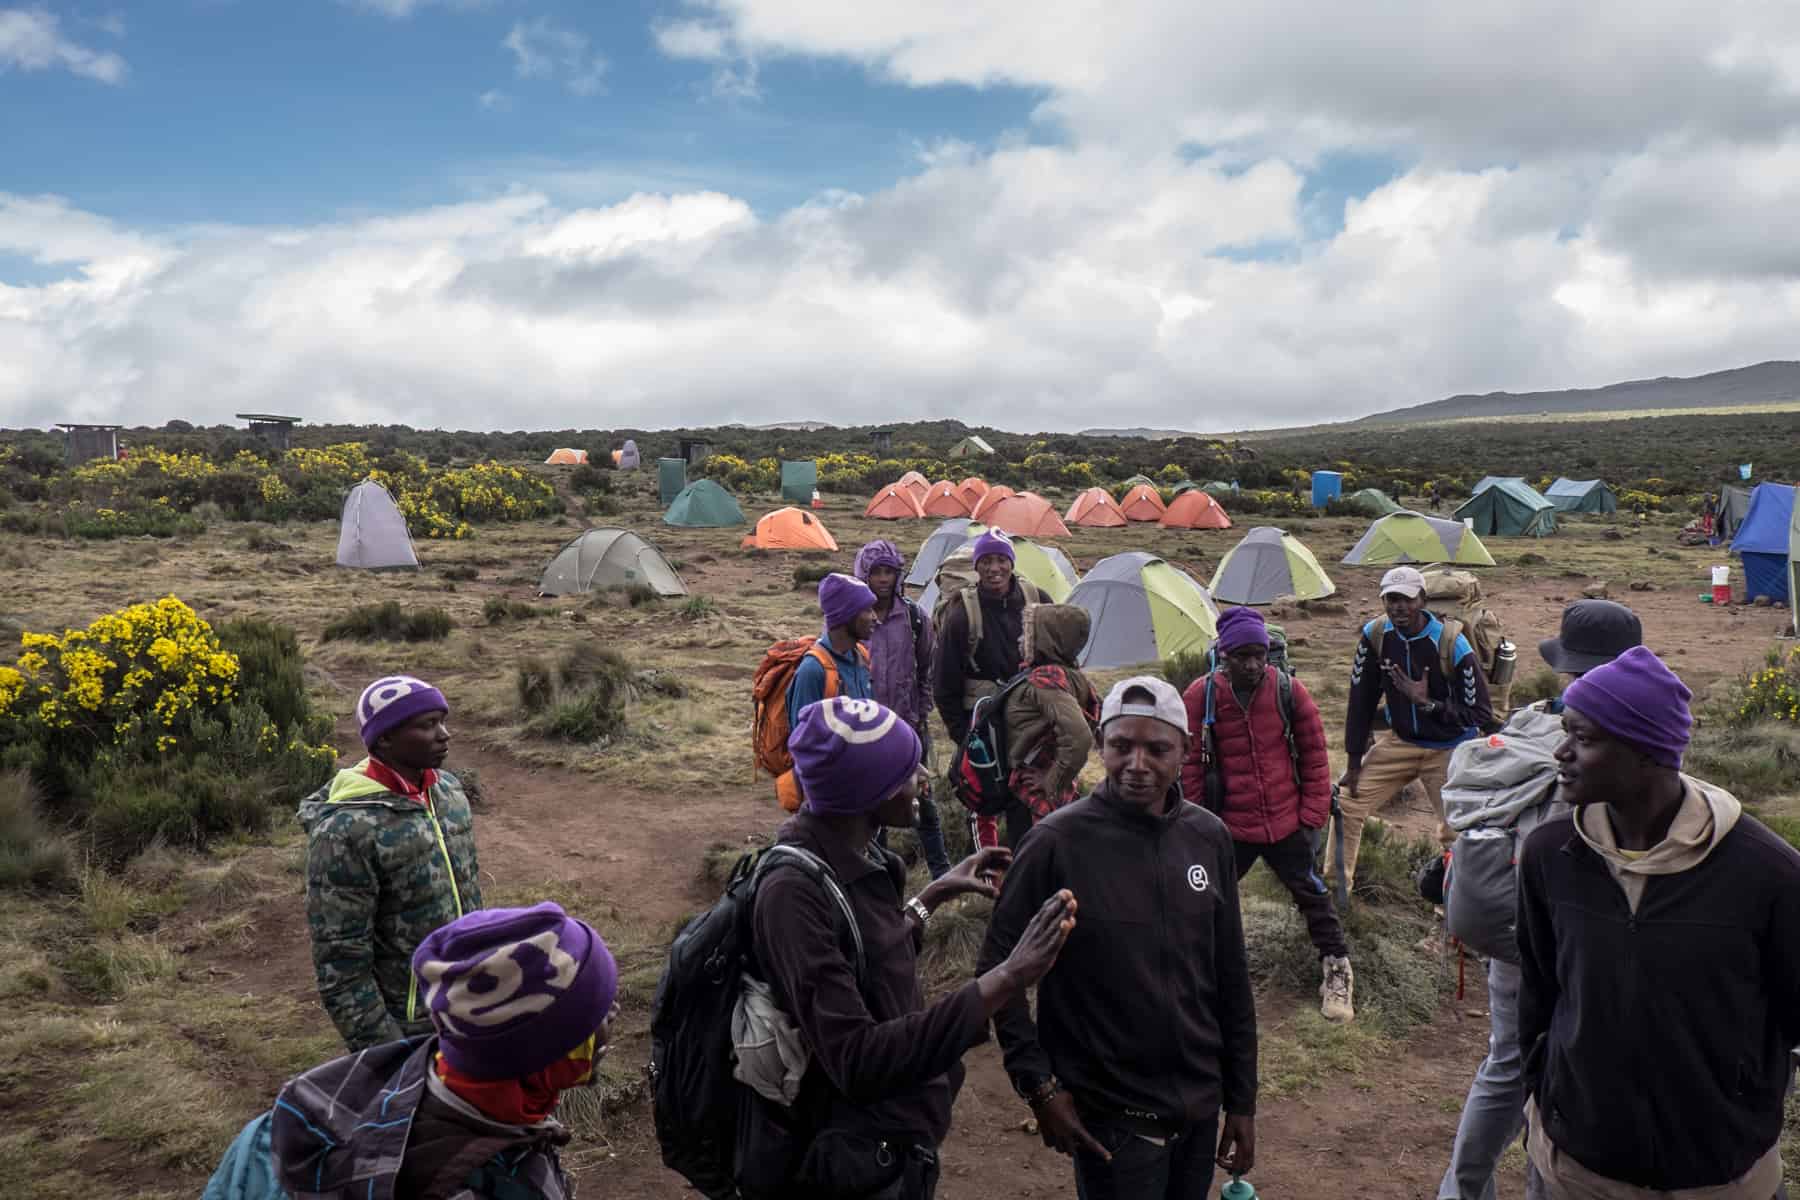 A group of porters in front of a camp on the dry-grassy plains of Mount Kilimanjaro. 